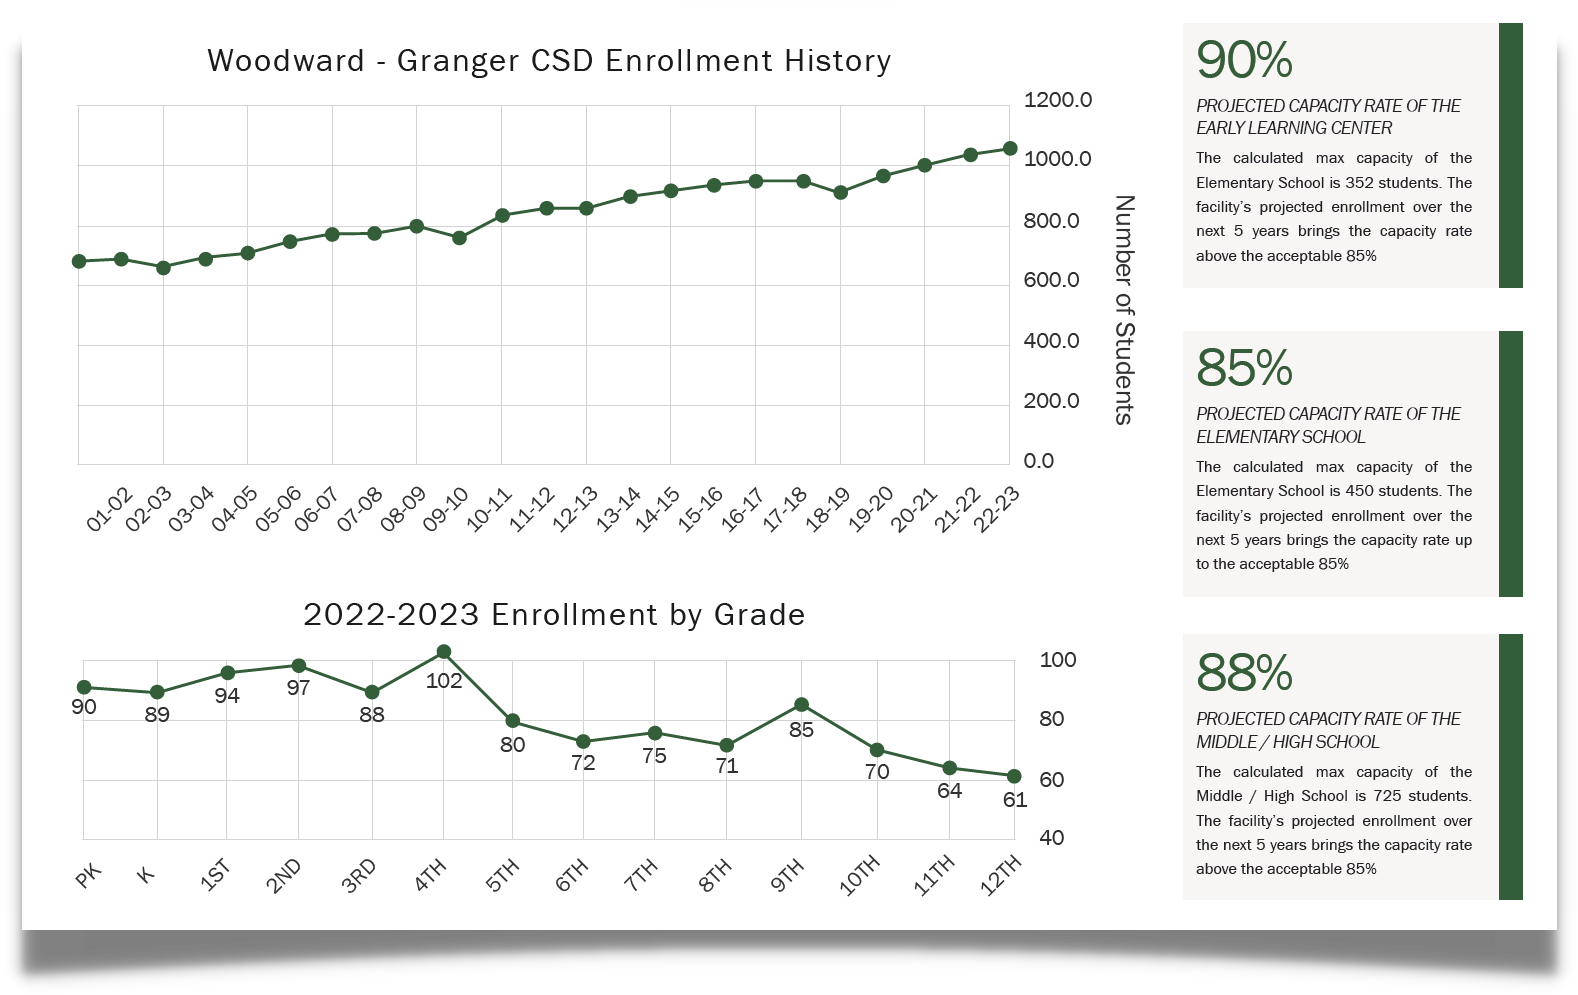 WG Enrollment History from 2001-2022. Growth from 600-1100. Breakdown of 22-23 enrollment by grade. Percent capacity full of current buildings.